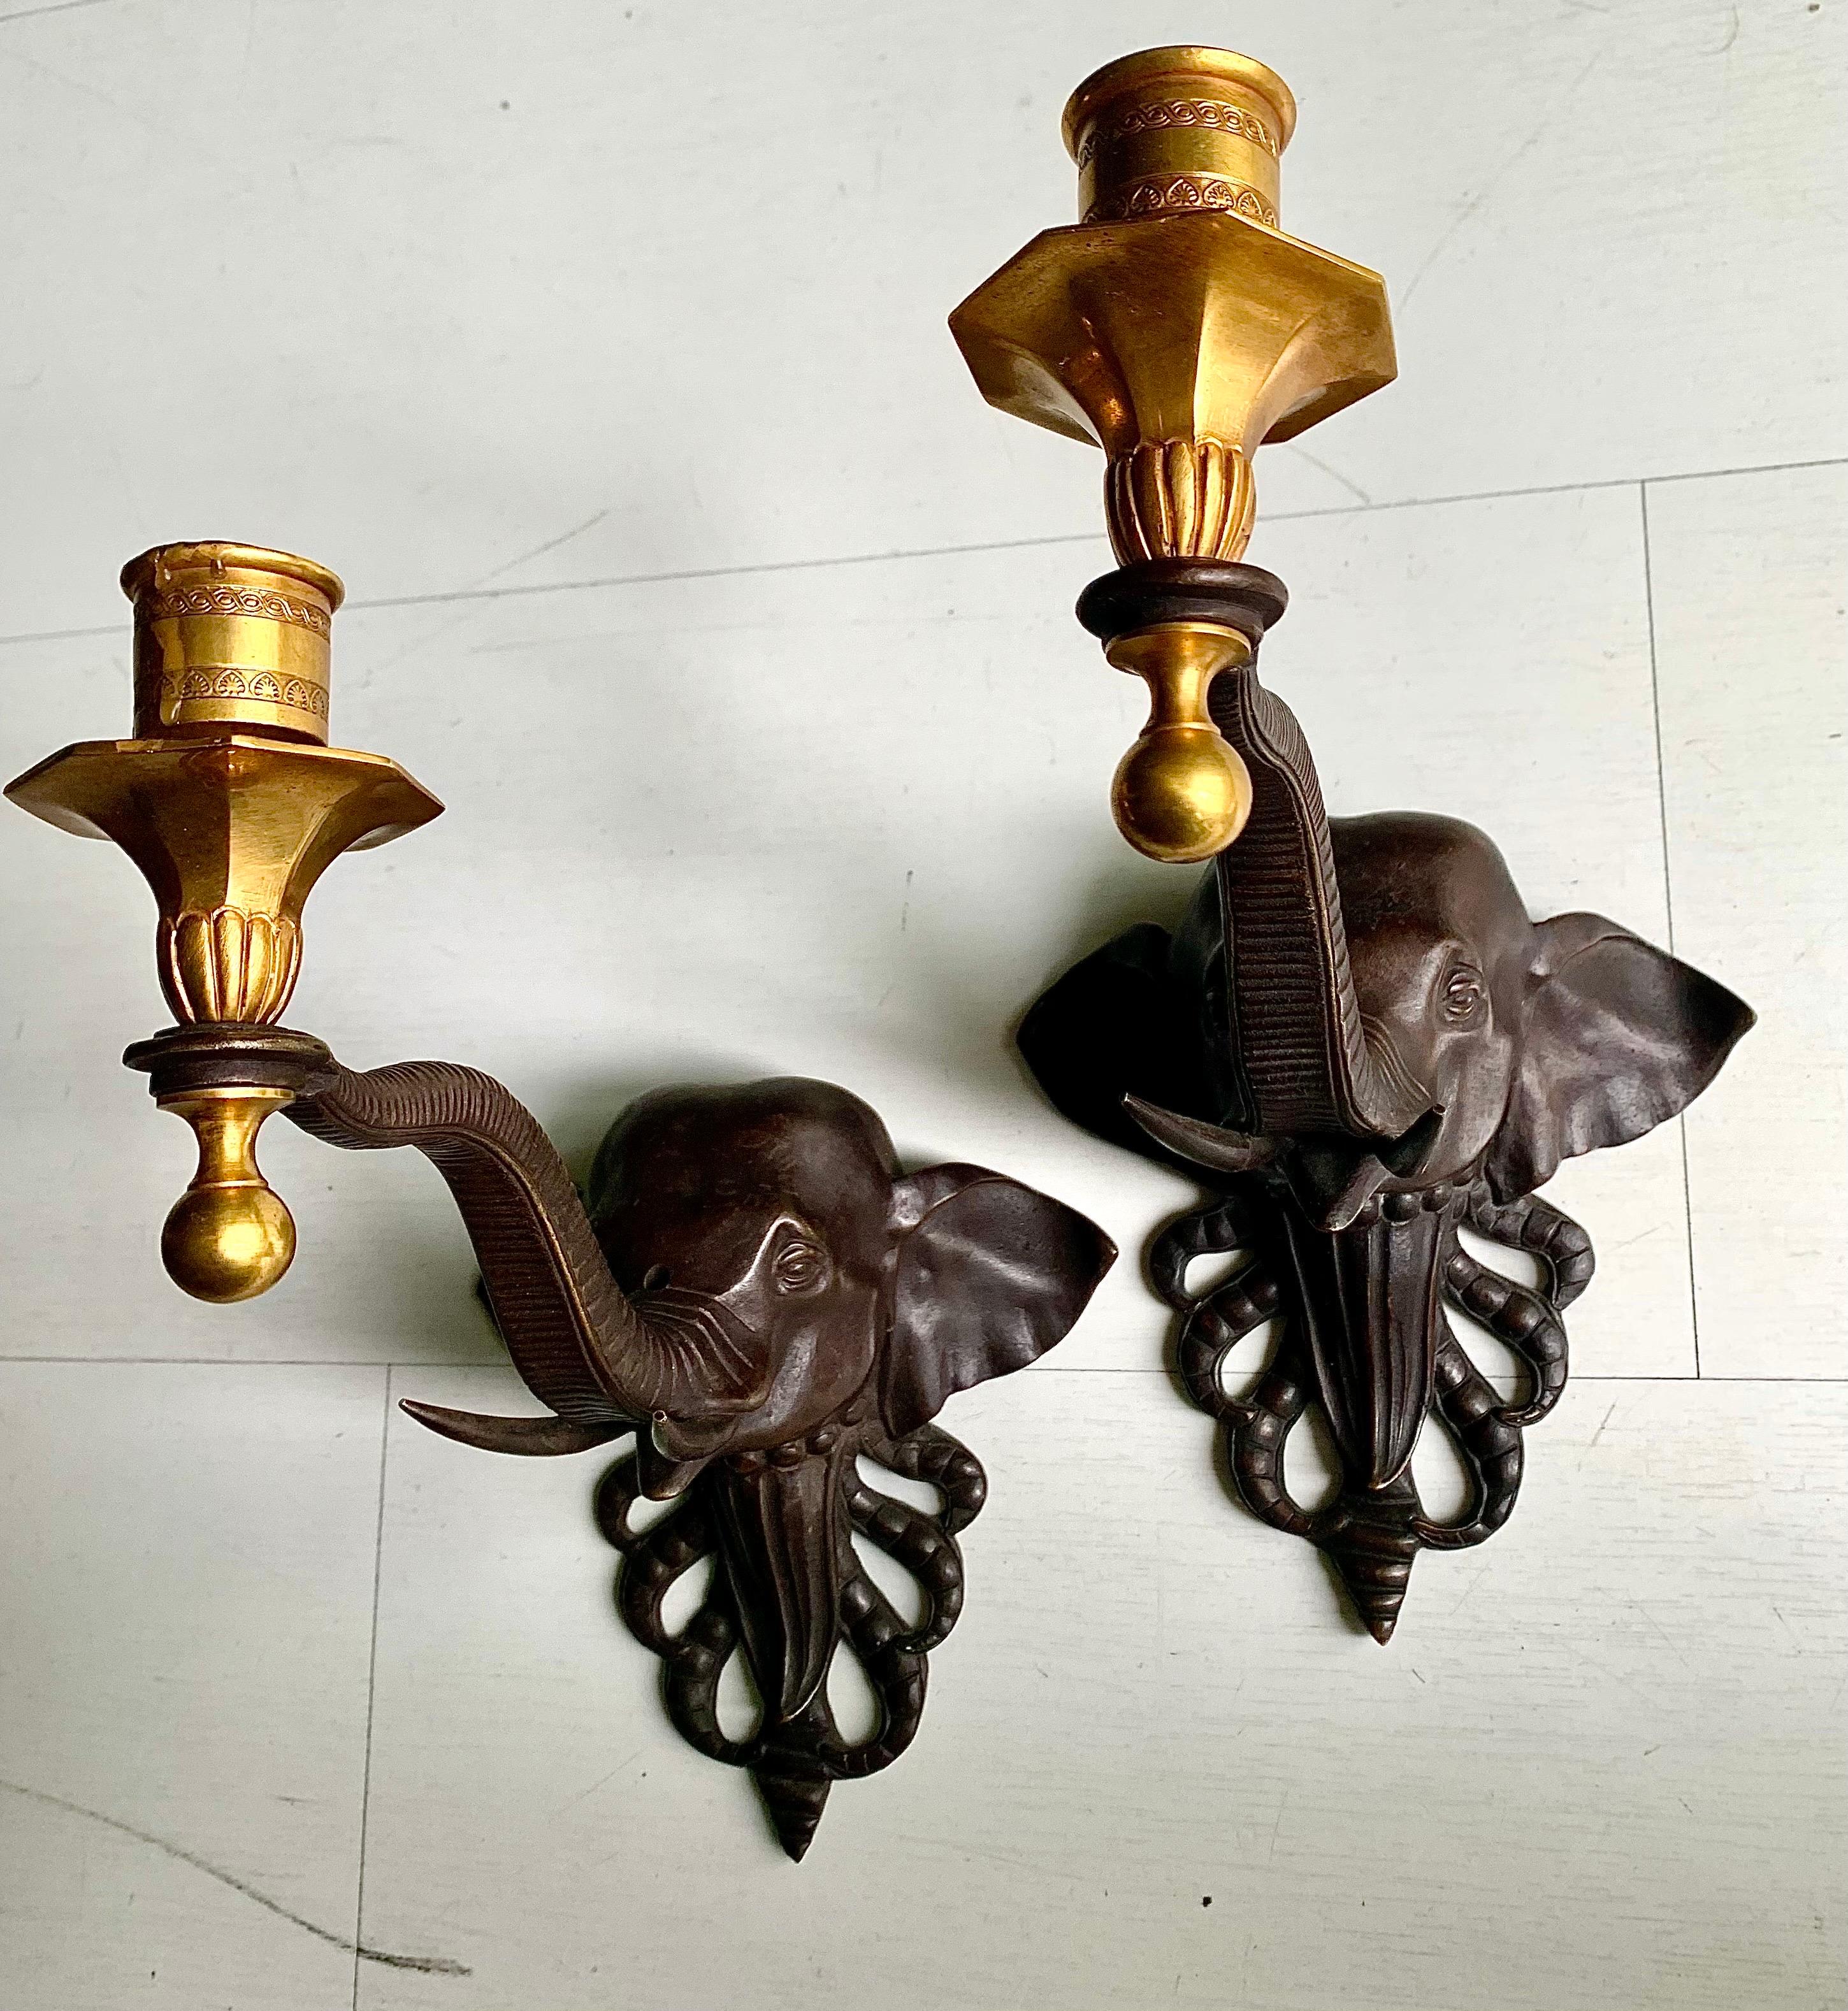 A pair of rare and original wall candle sconces, Regency style with influence of colonial fauna themes, the sconces represent a bronze elephant head, from whose trunk the ormolu bronze candle holder is held,